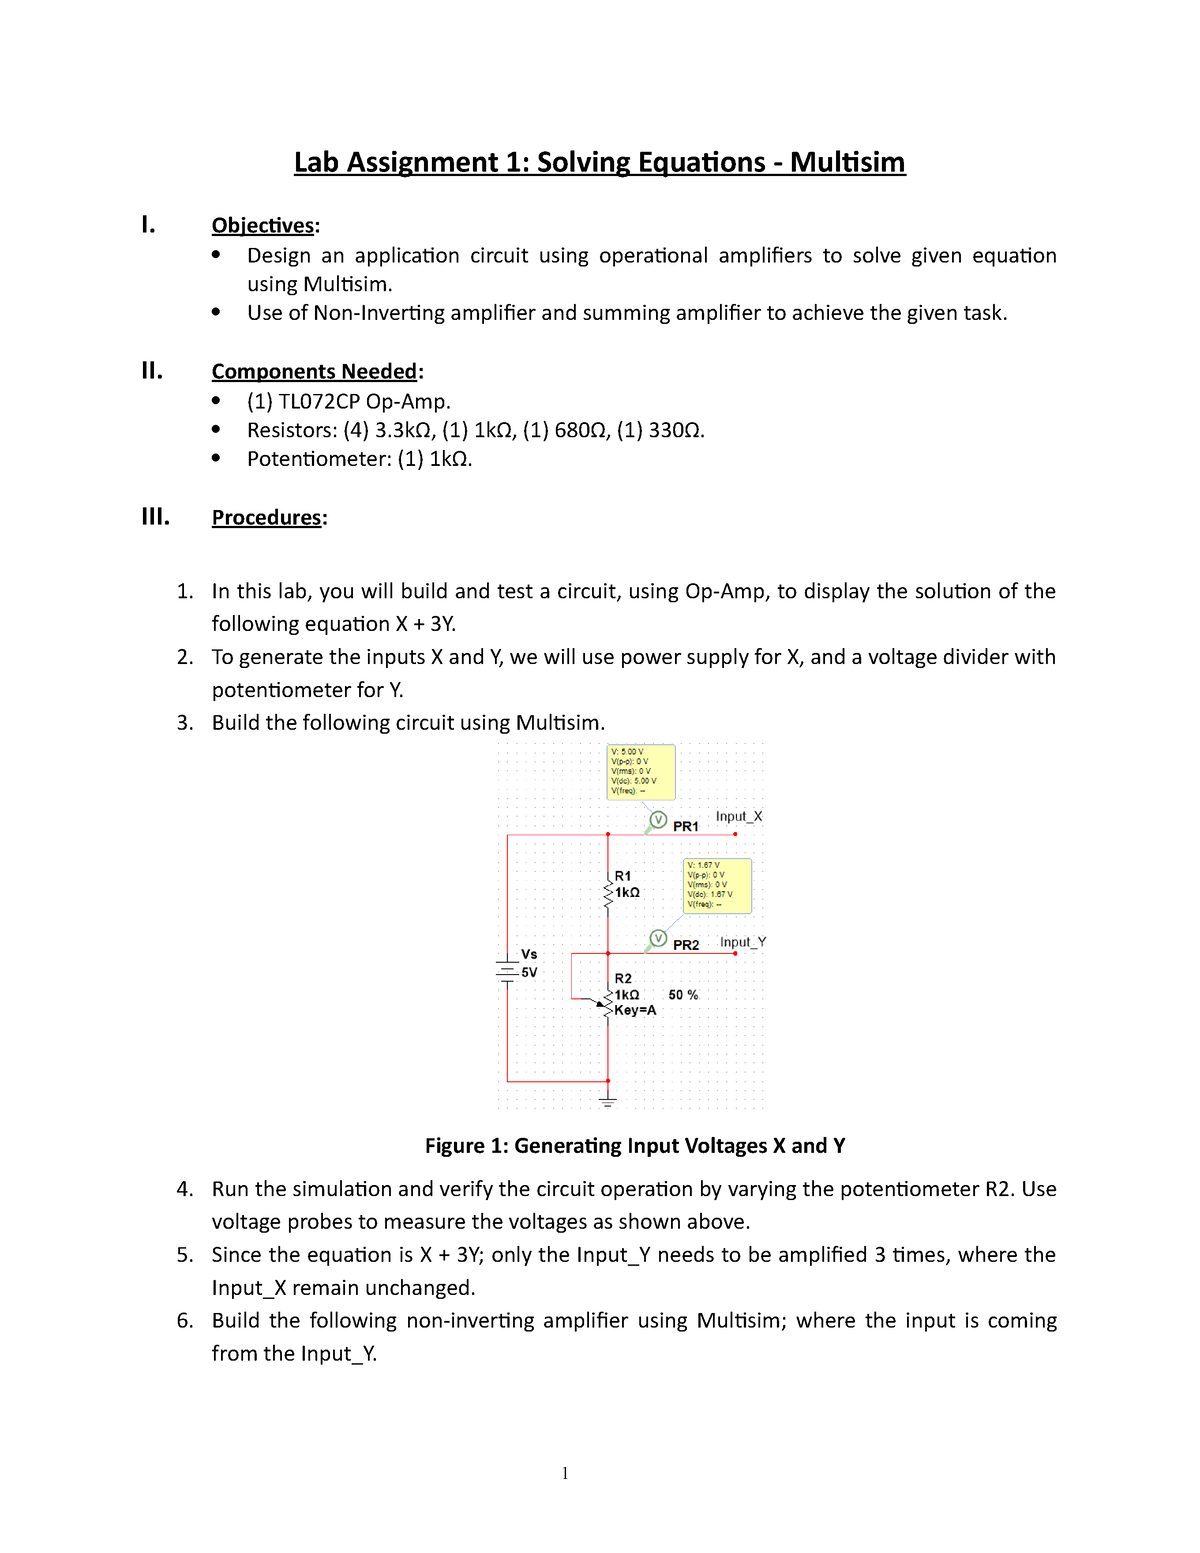 eet221l-wk1-lab-1-solving-equations-using-op-amps-lab-assignment-1